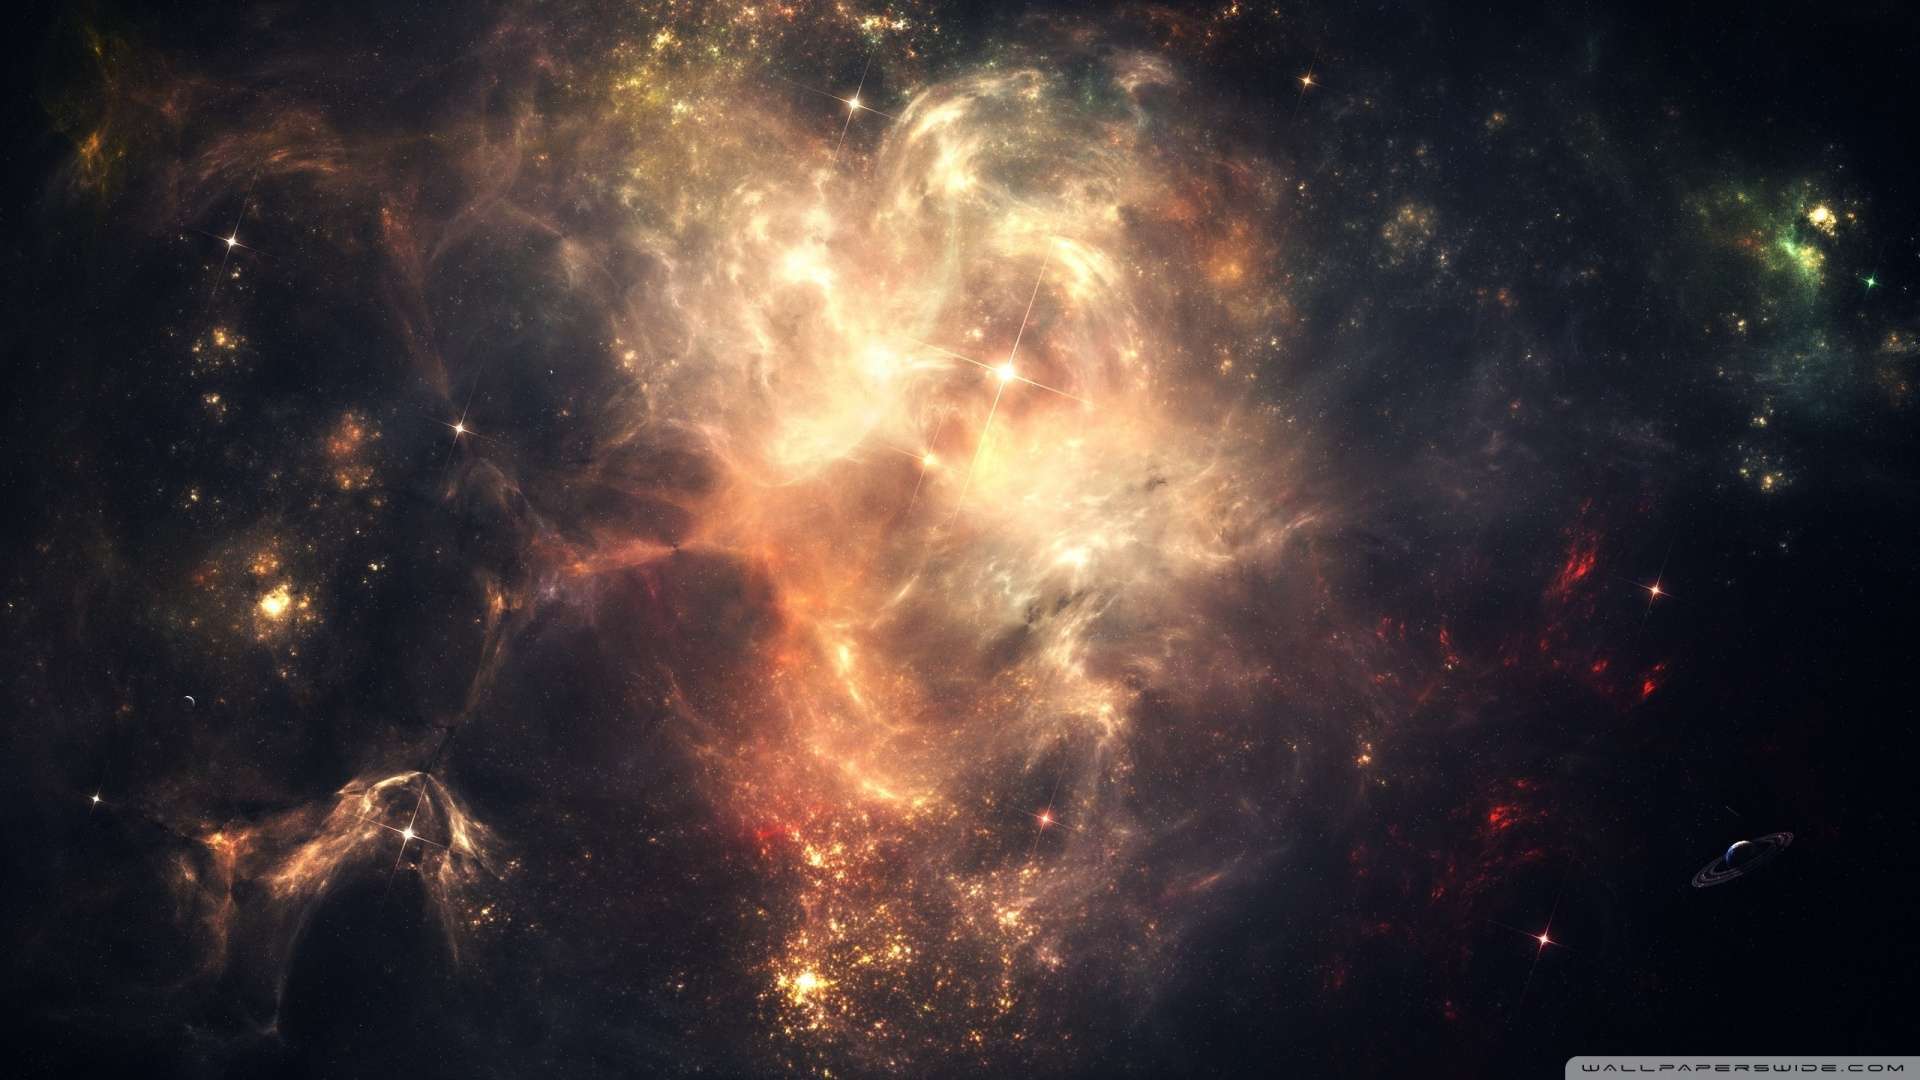 Wallpaper Outer Space Nebulae 1080p HD Upload At February